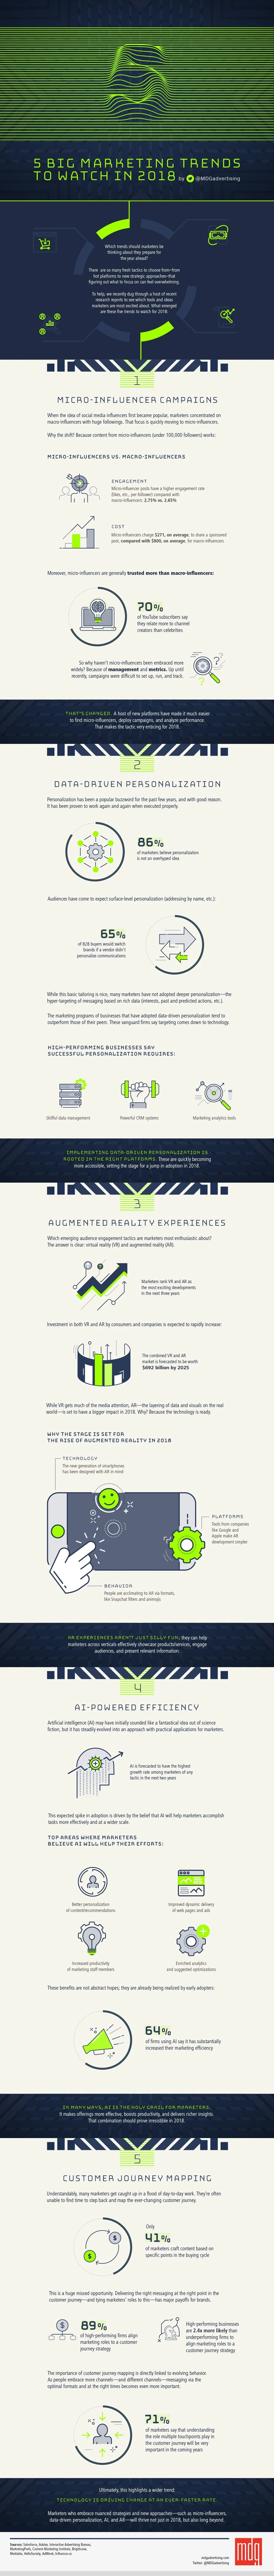 5 Big Marketing Trends to Watch in 2018 - #infographic